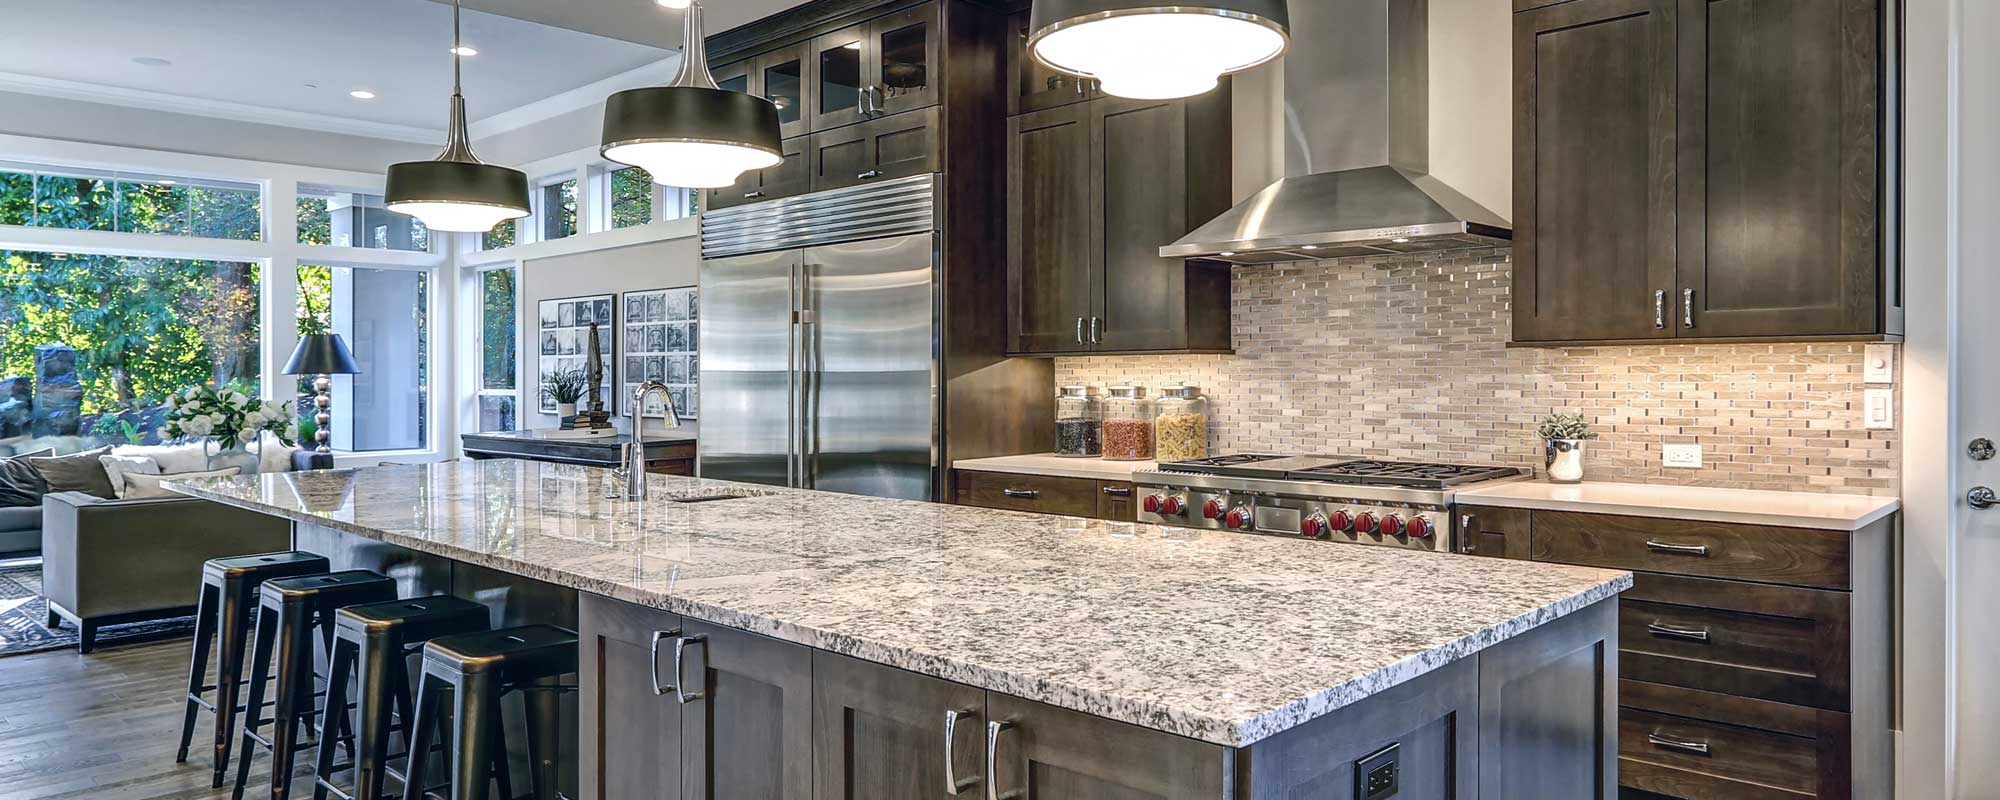 Granite and Cabinetry